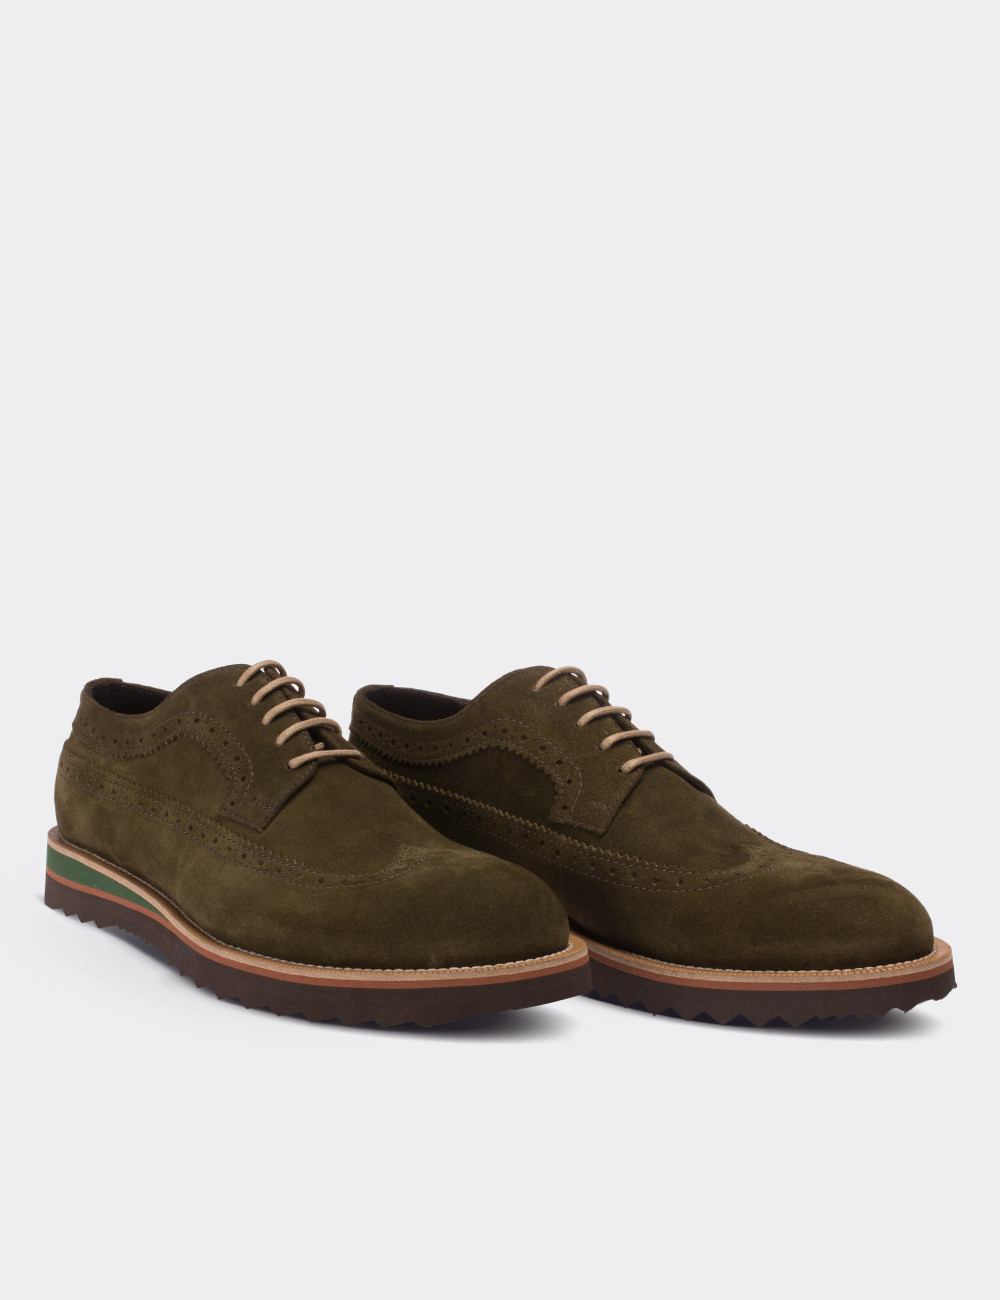 Green Suede Leather Lace-up Shoes - 01293MYSLE09